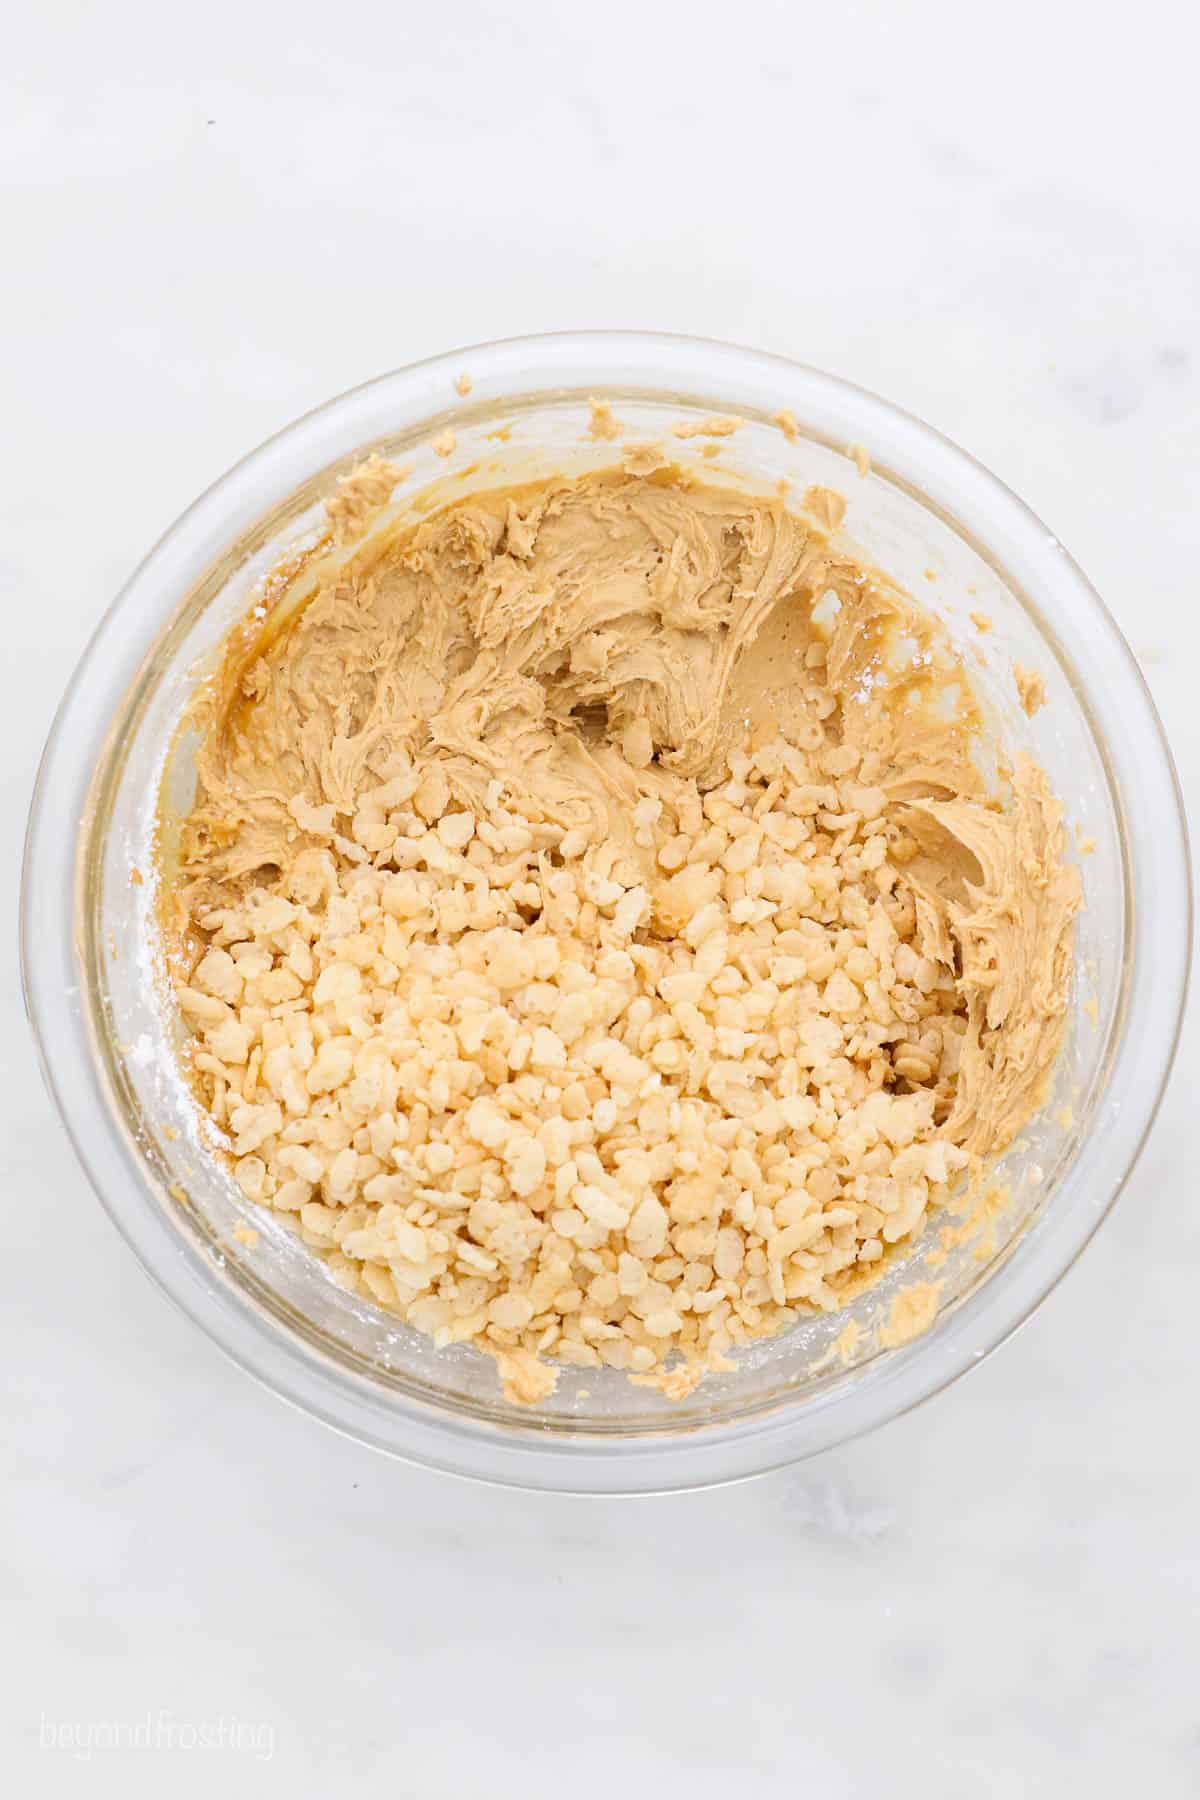 Peanut butter truffle dough in a bowl with Rice Krispies poured on top